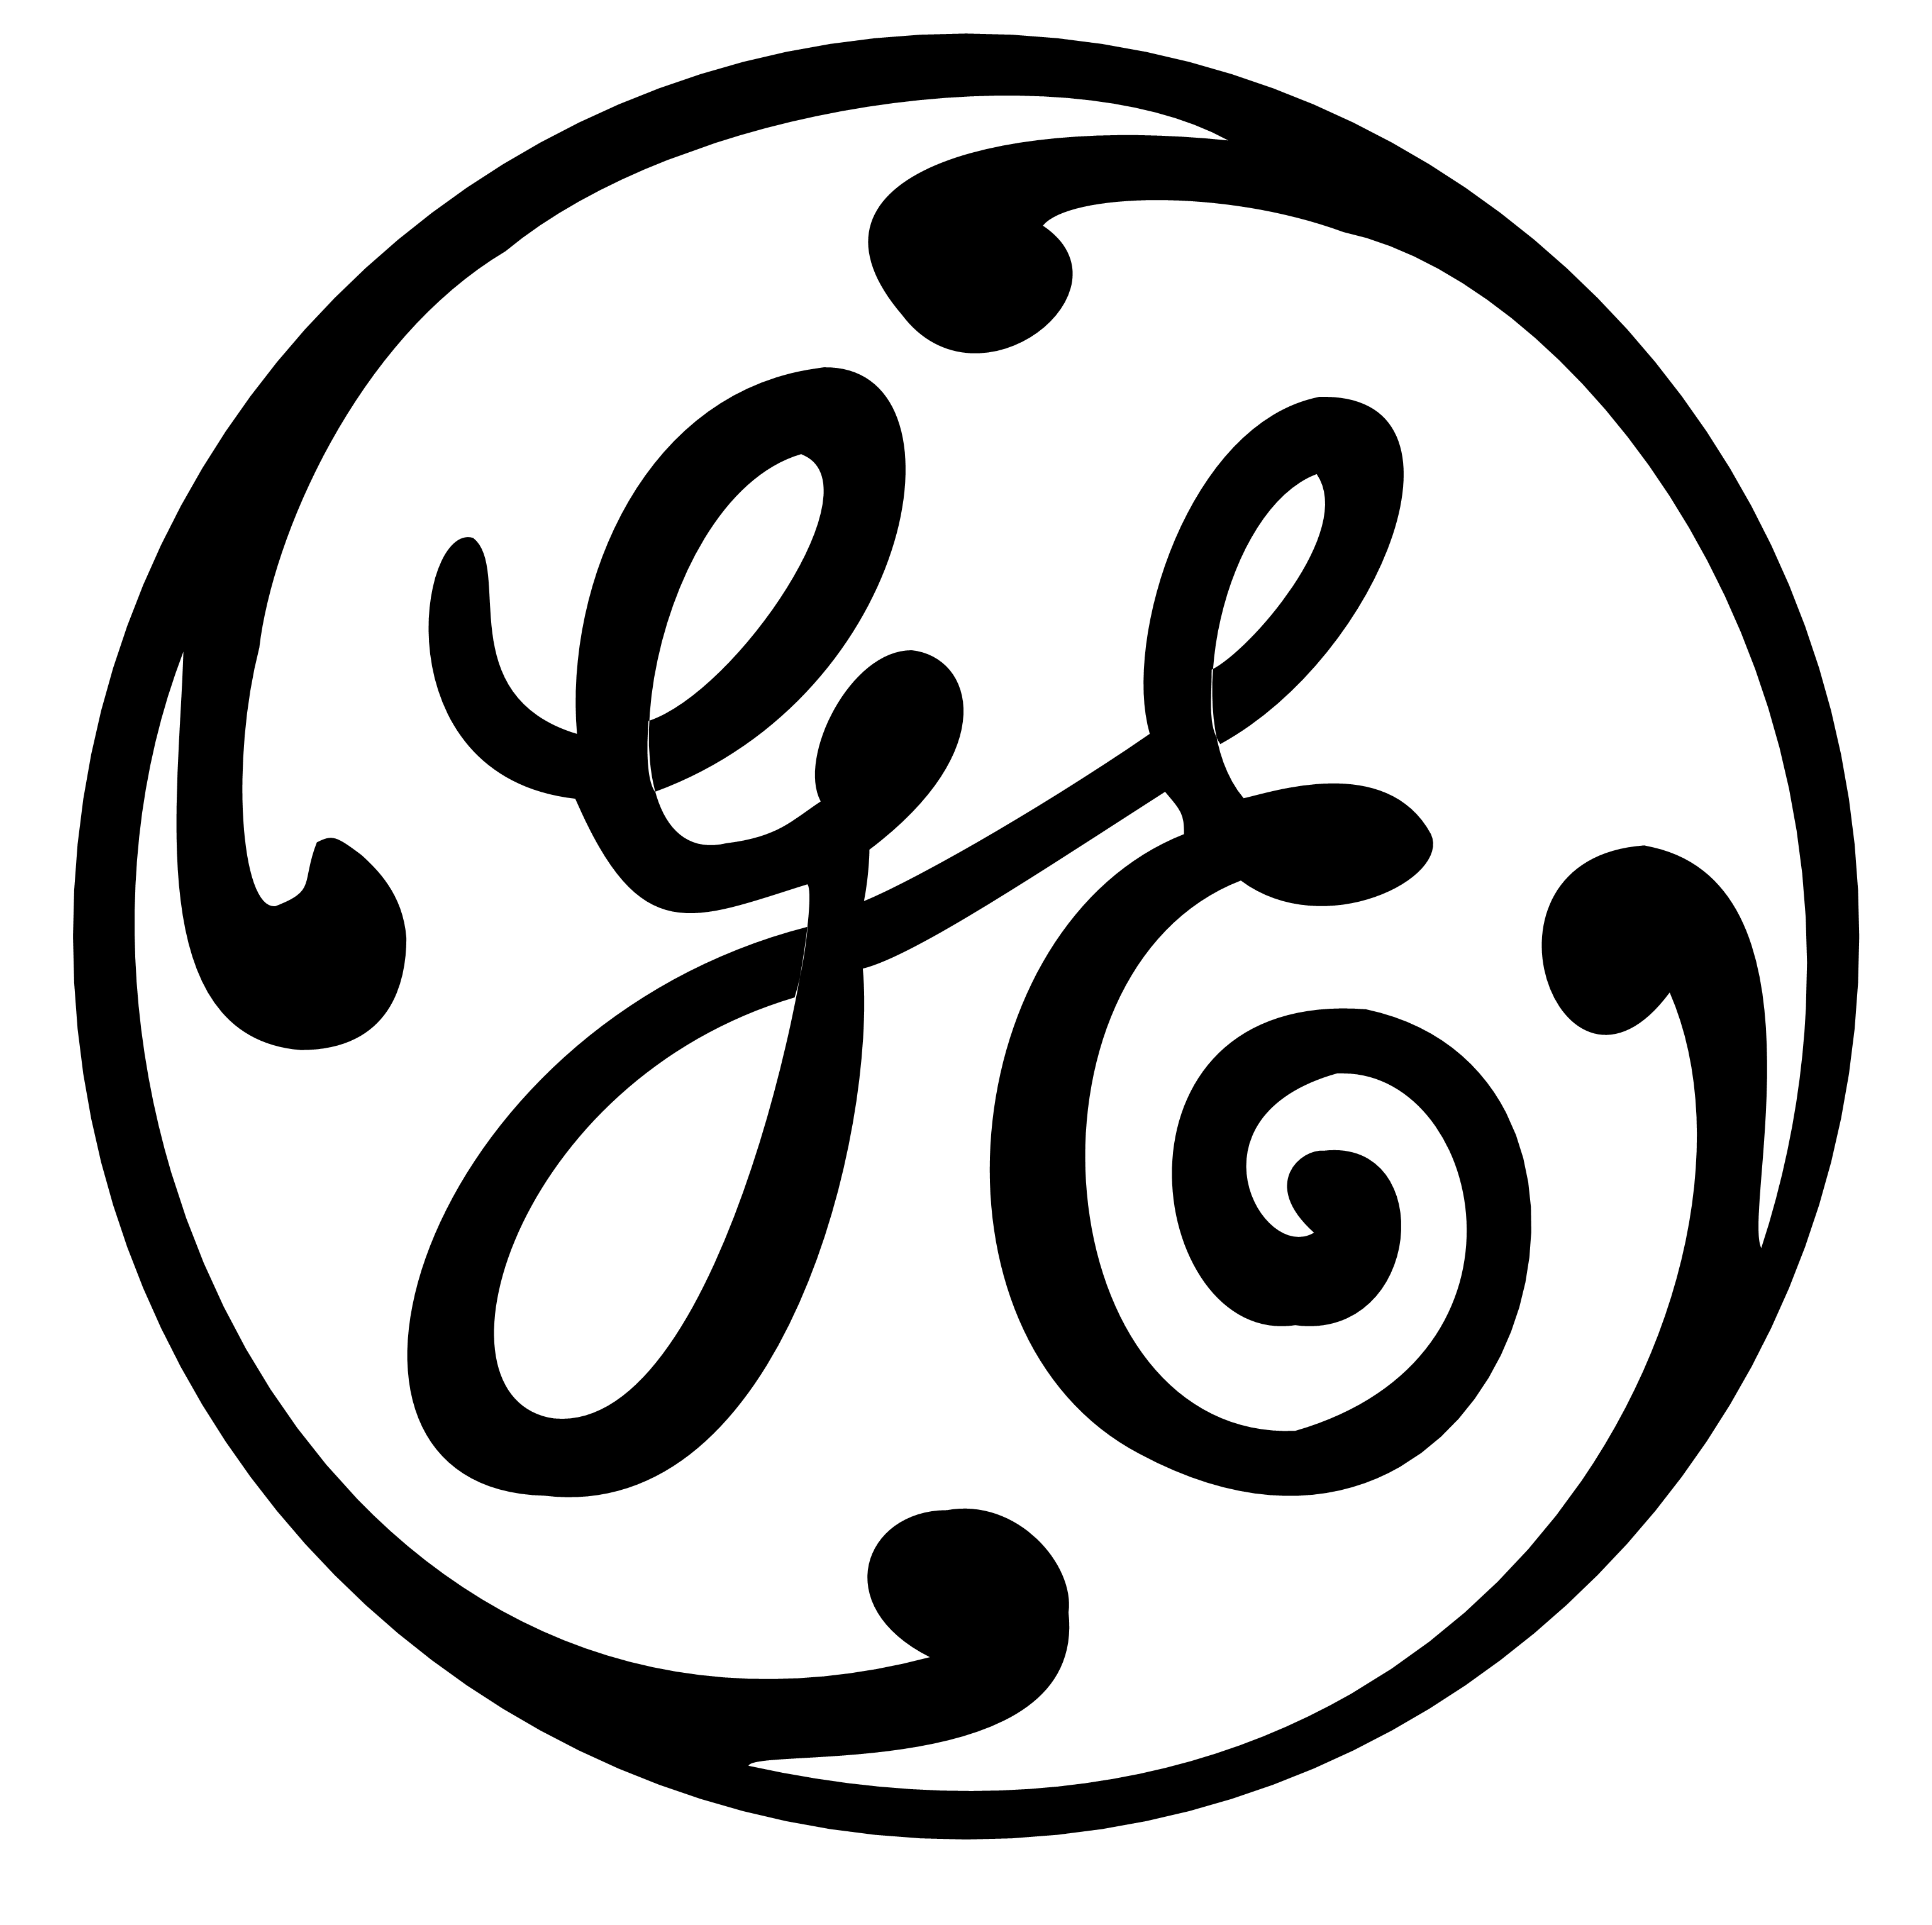 General Electric - Logopedia, the logo and branding site